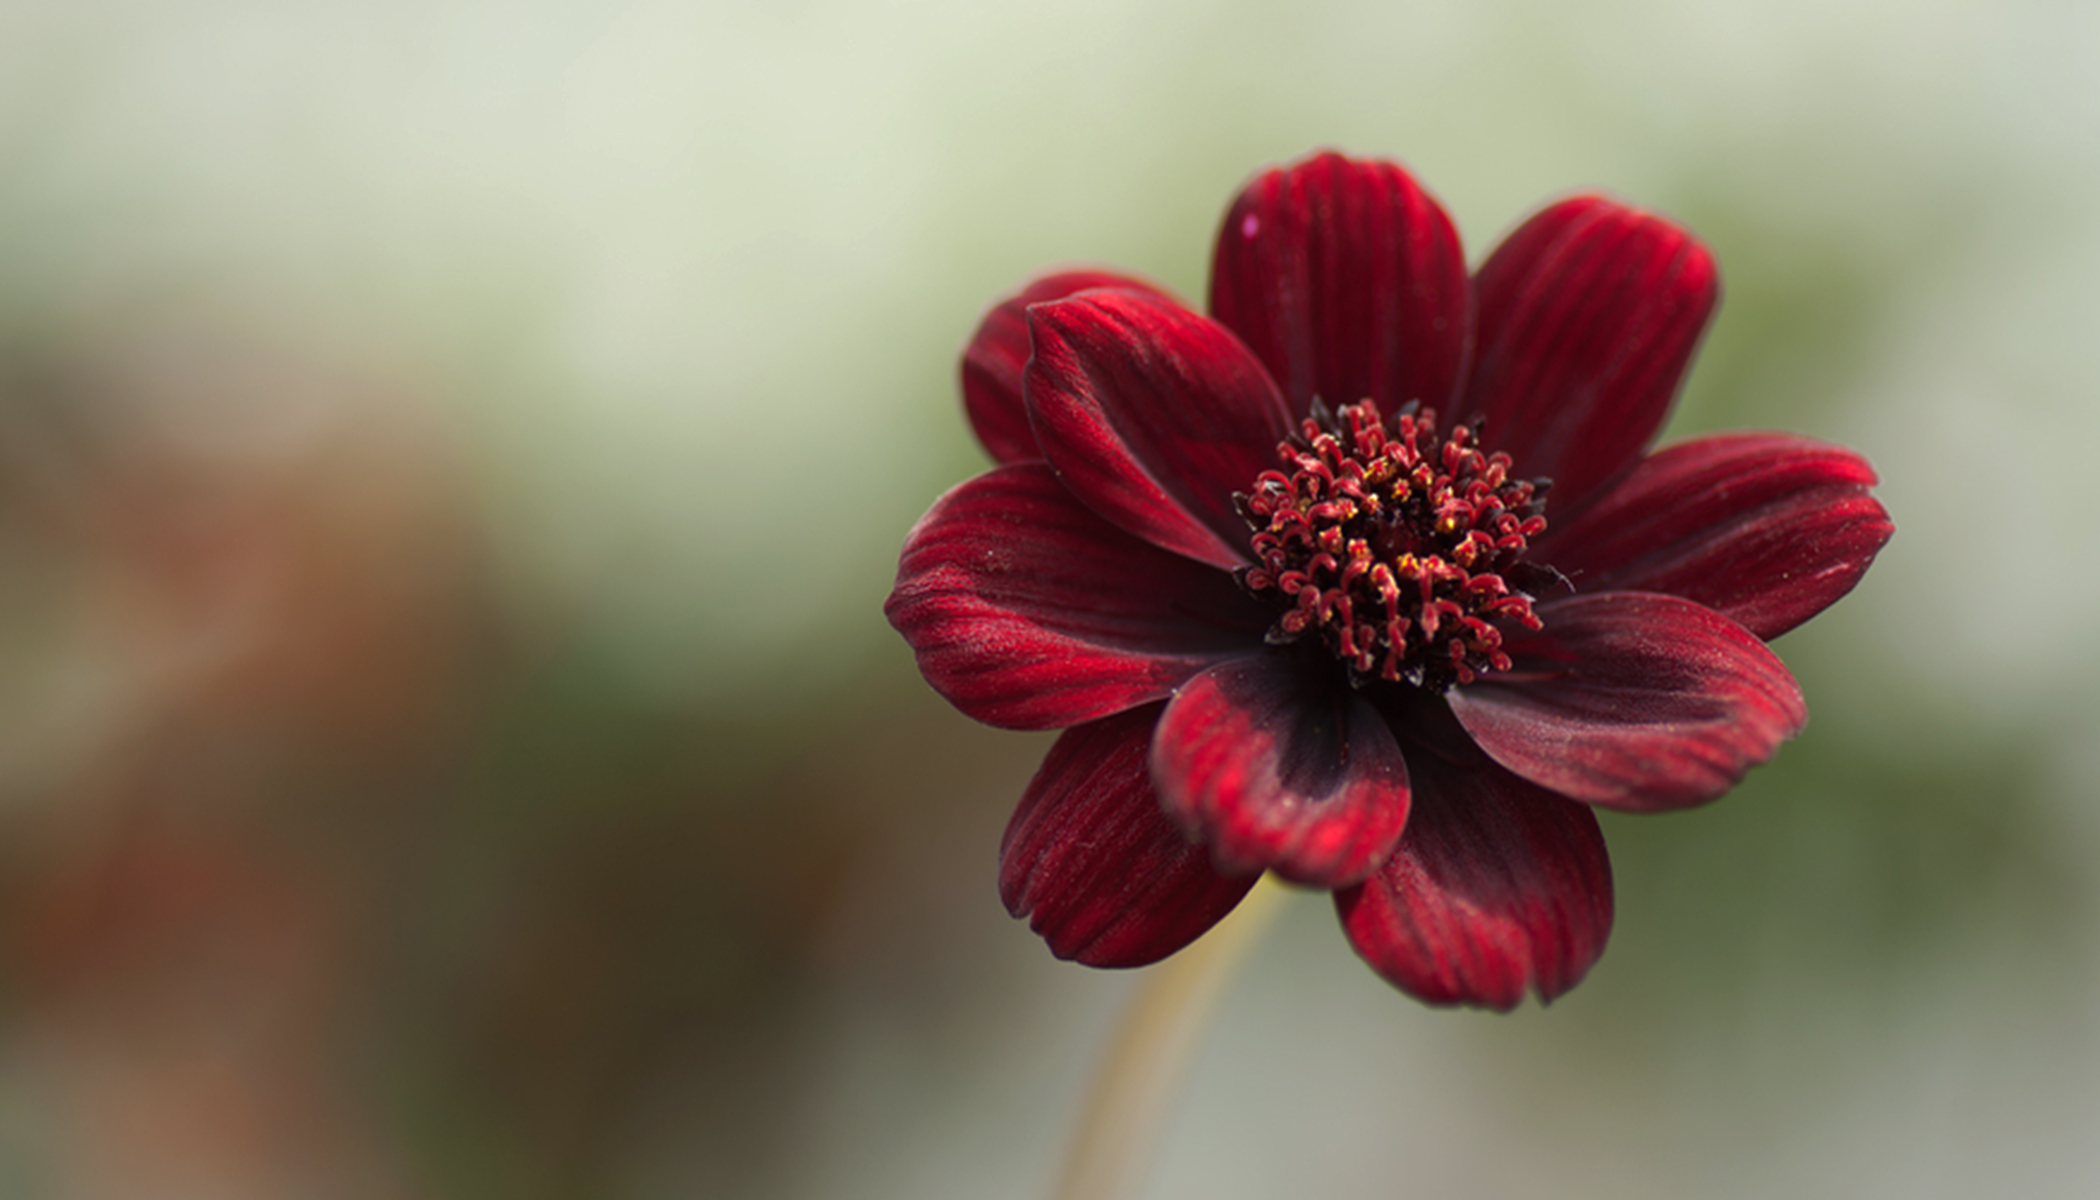 chocolate cosmos flowers exude a sweet scent that will remind you